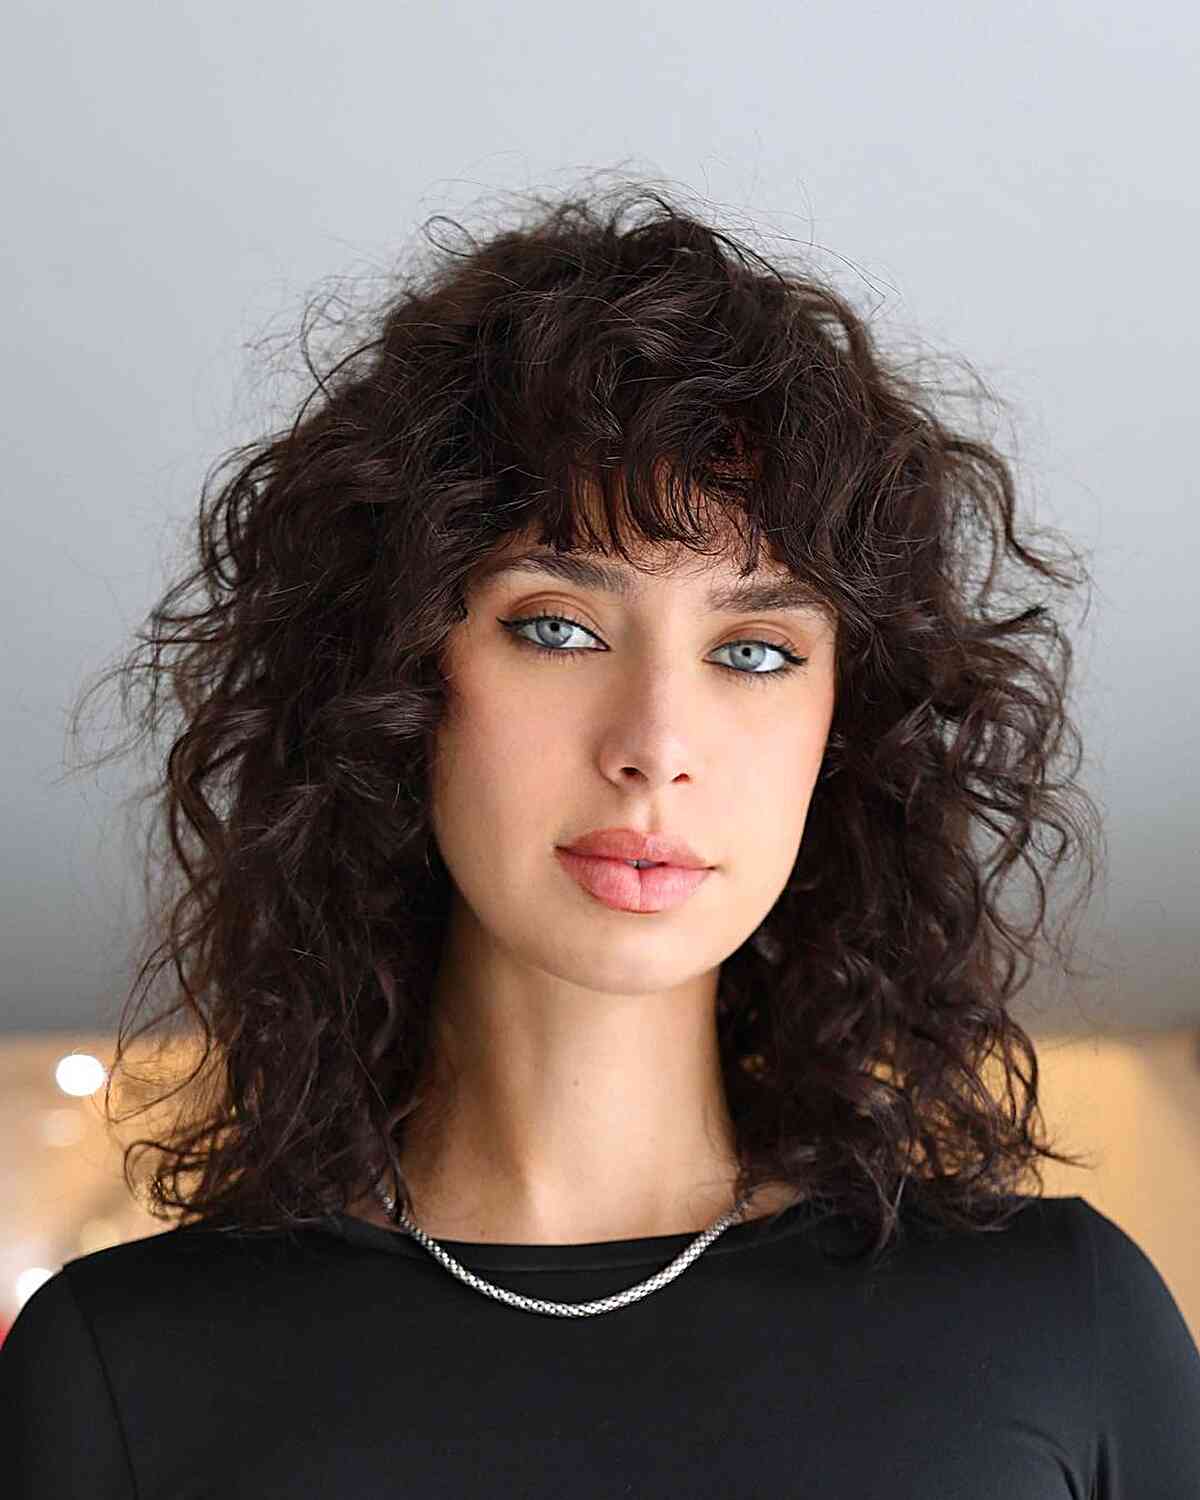 Messy and Frizzy Curly Cut with Fringe for women with shoulder-length hair